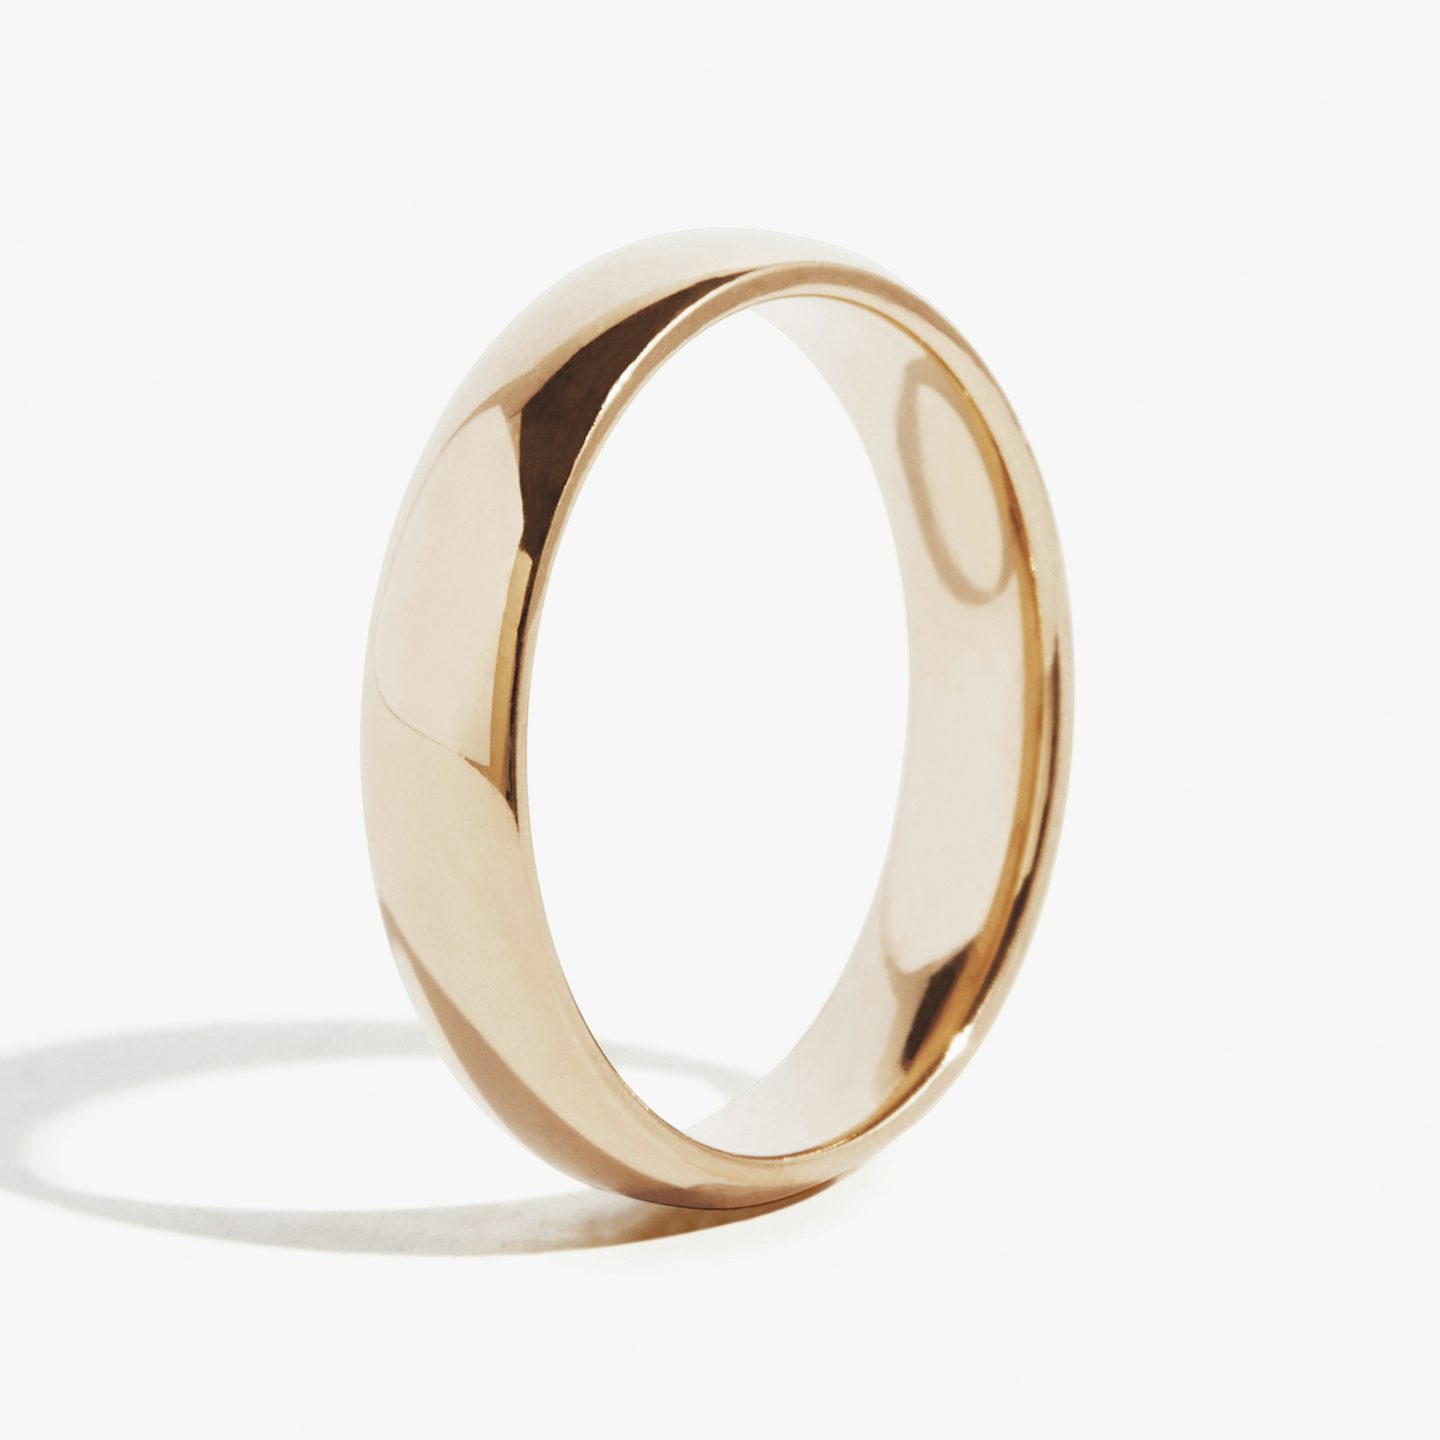 The Round | 14k | 14k Rose Gold | Band width: Large - 4.5mm